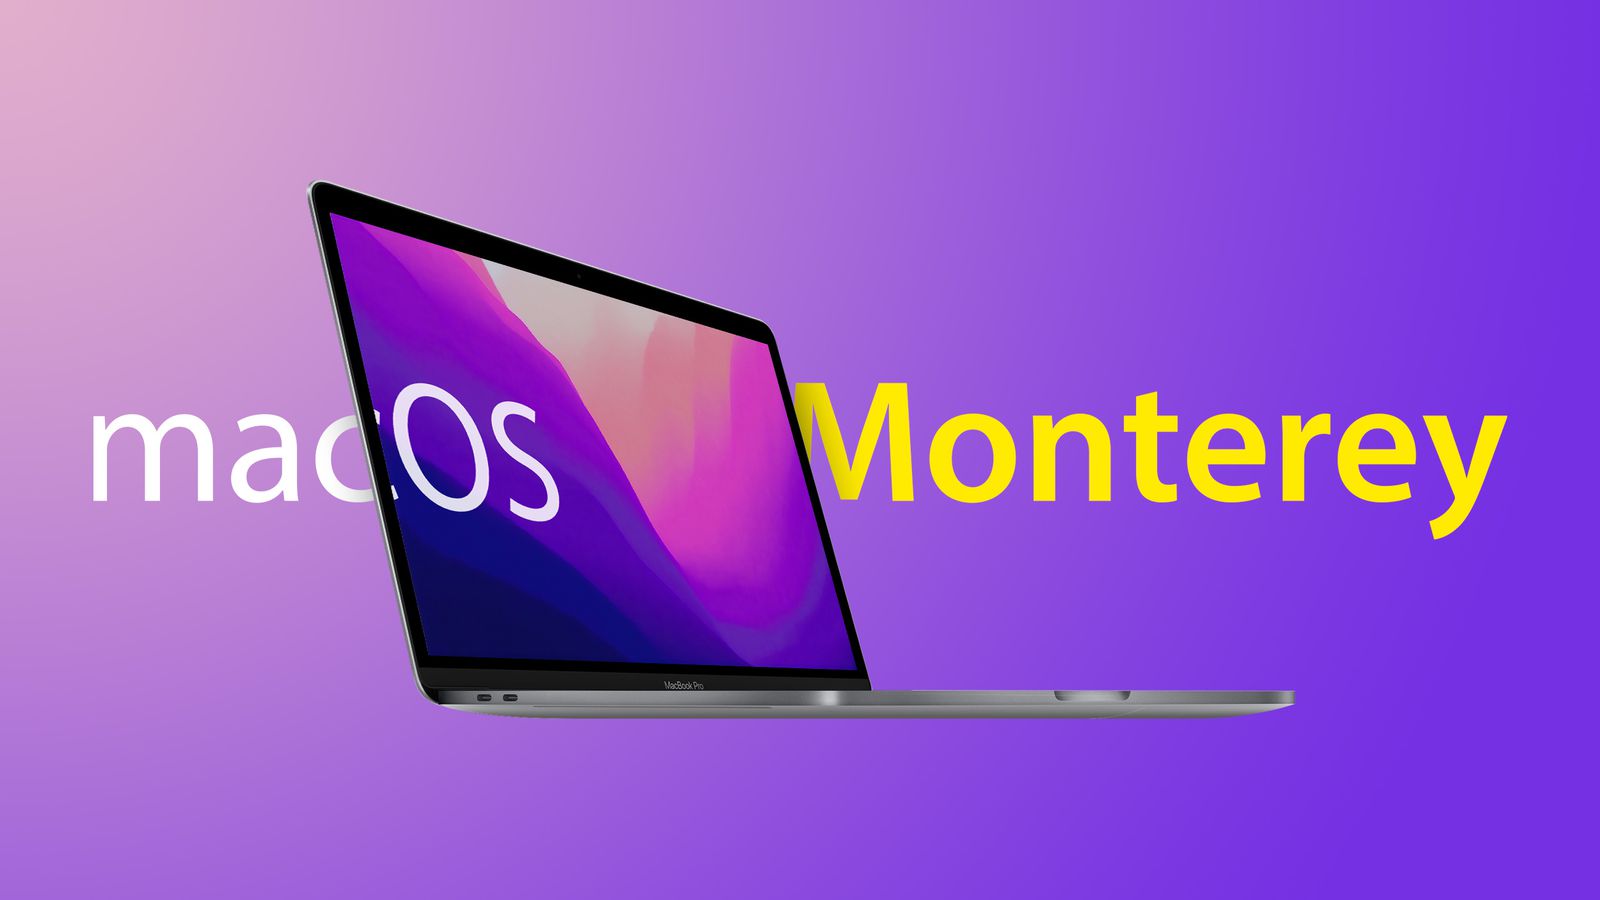 Are You Ready to Explore macOS Monterey